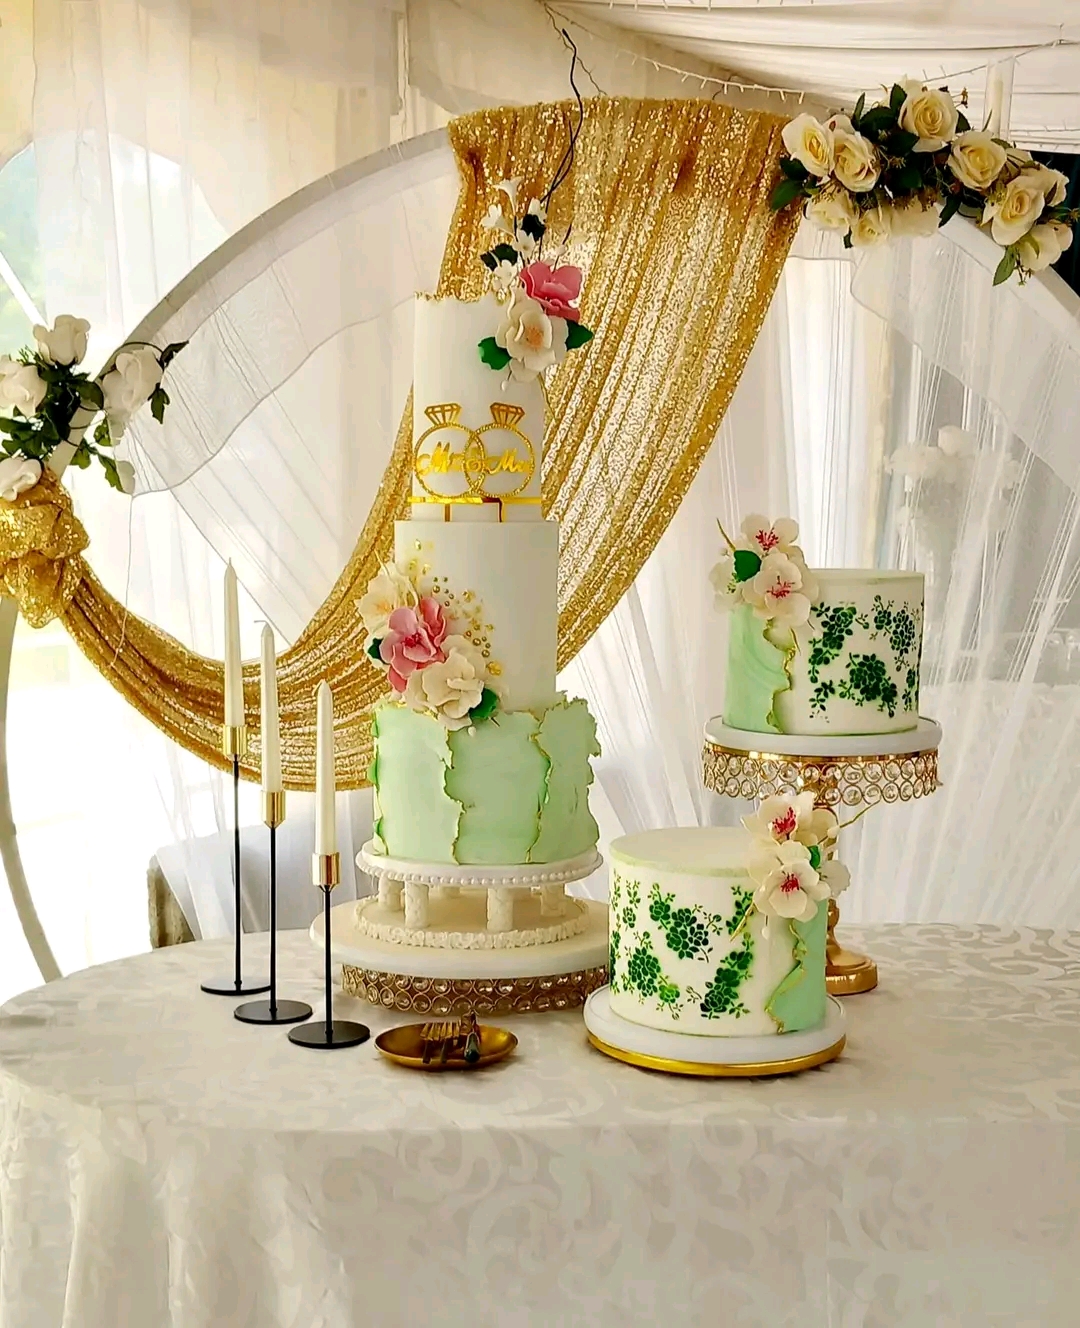 GOLD , WHITE AND GREEN THEMED